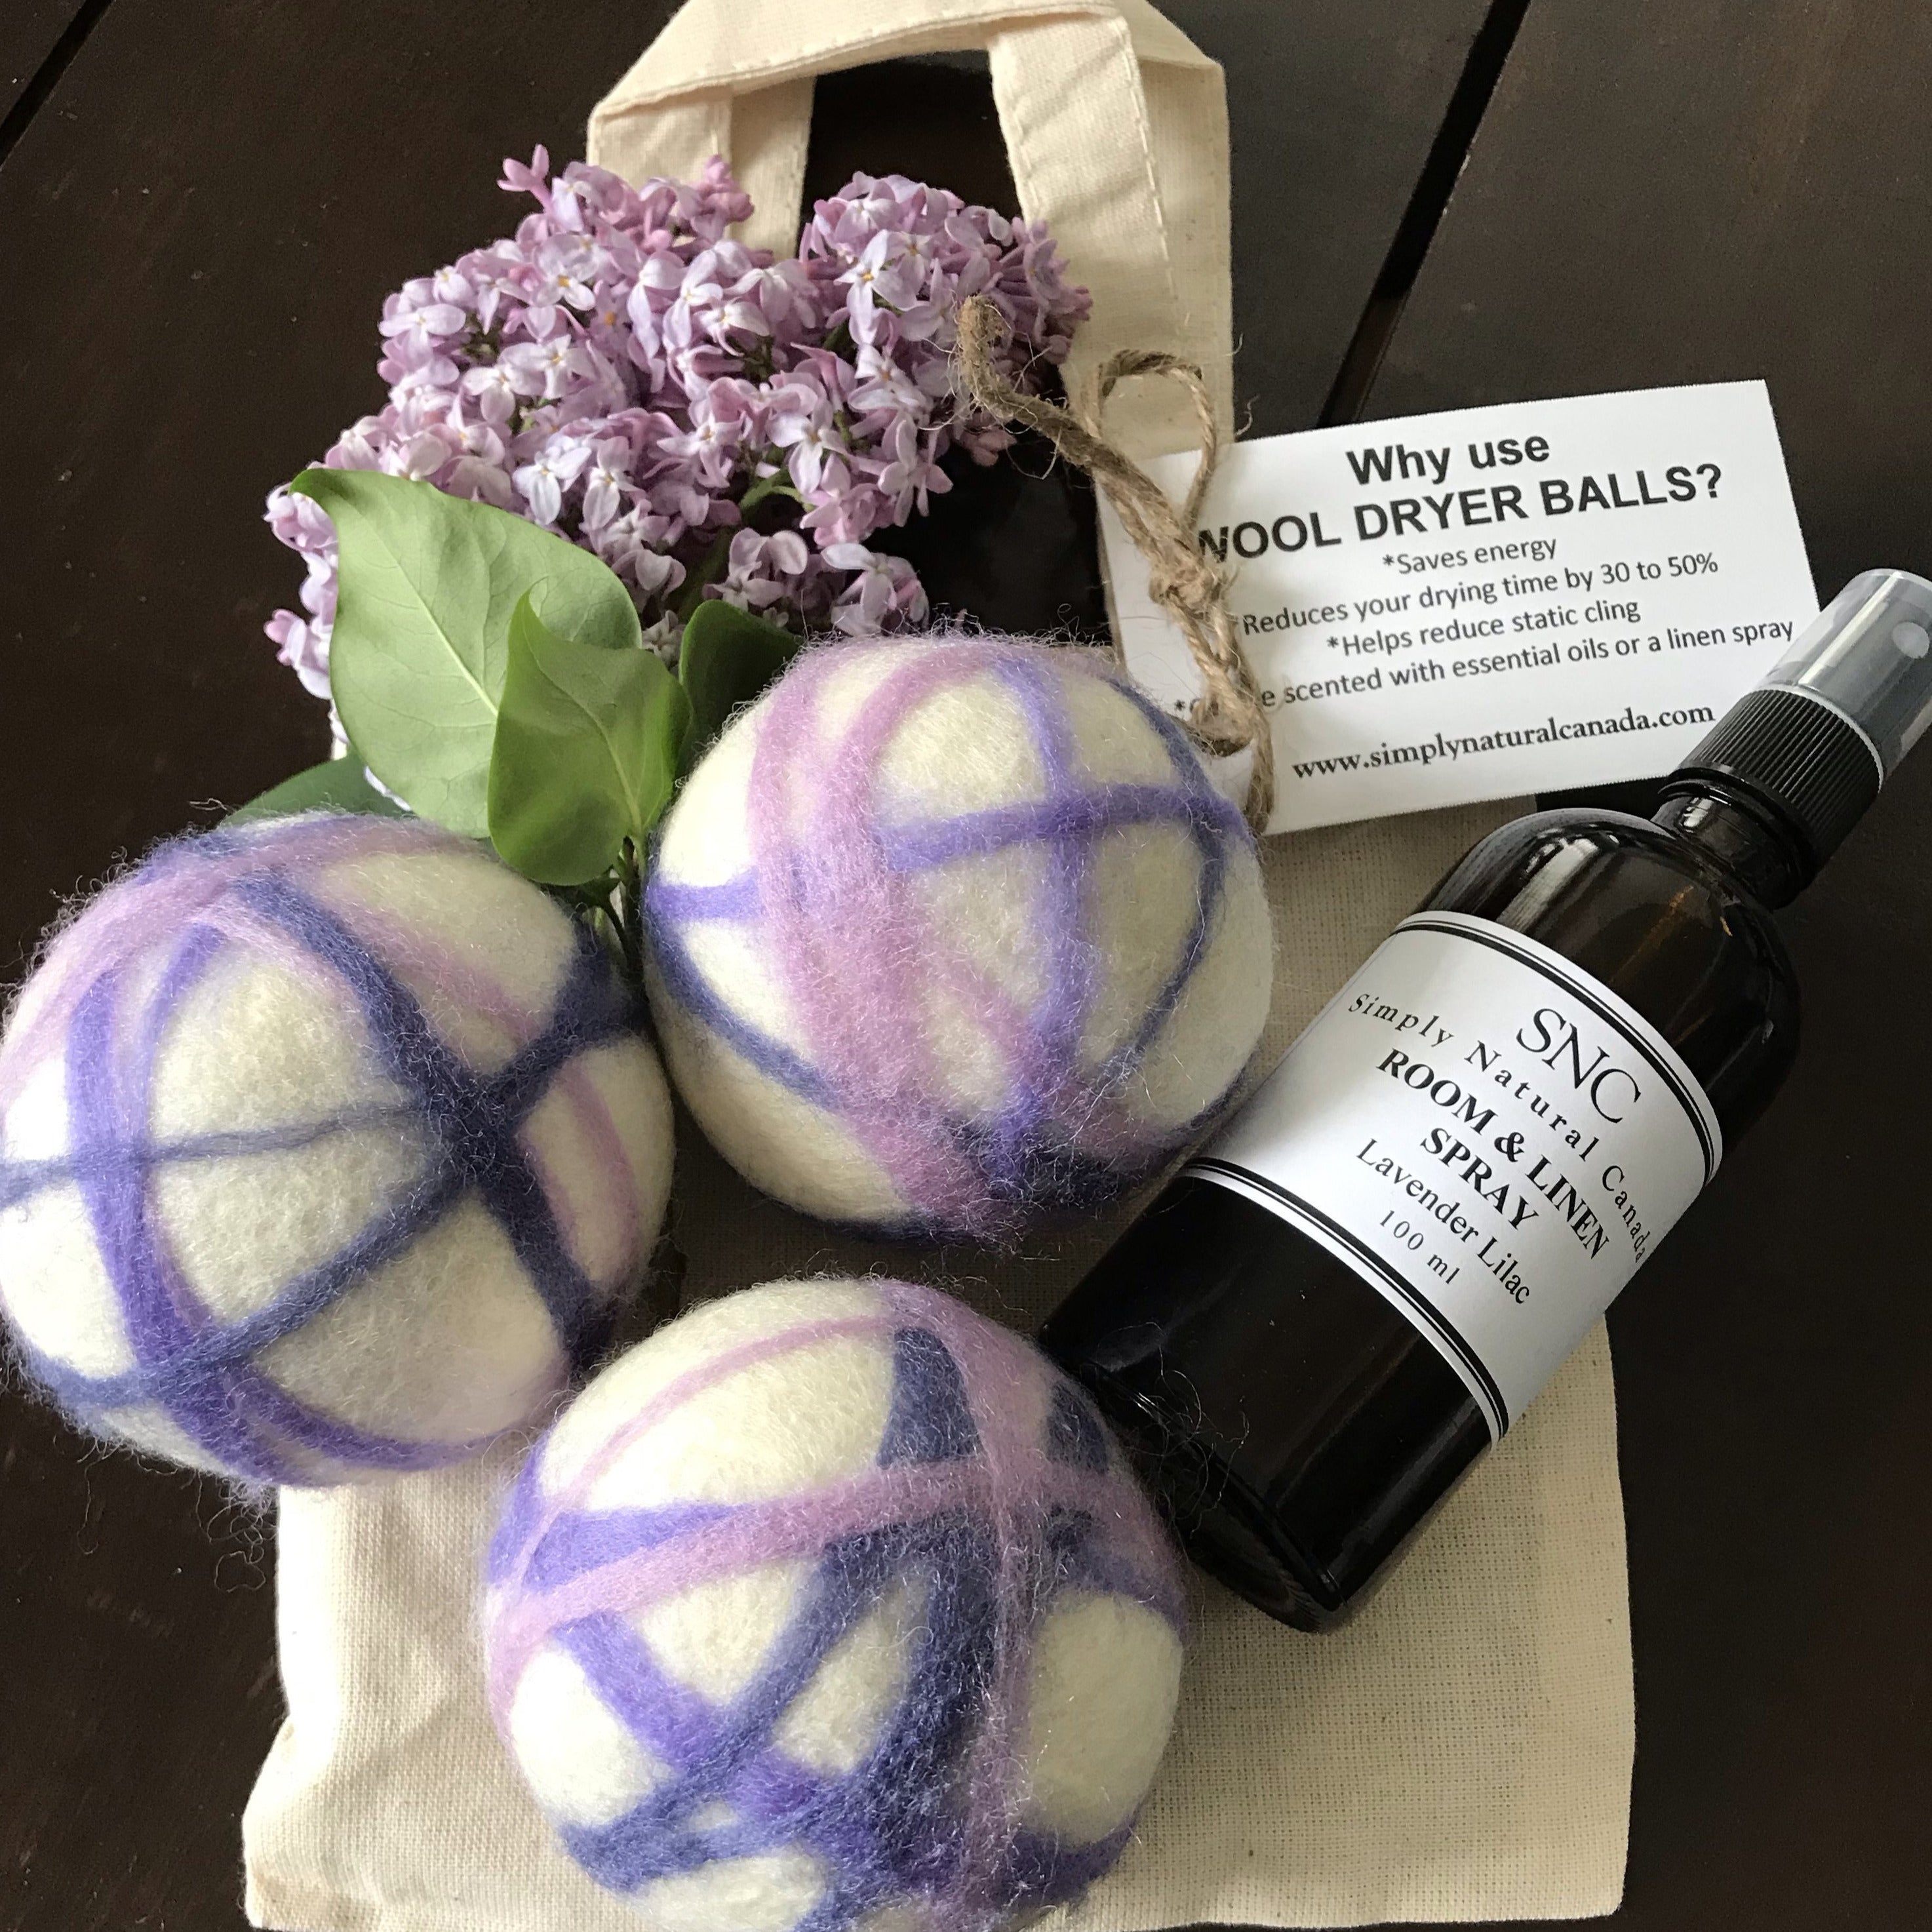 canadian made lavender lilac room and linen spray also works well for scenting dryer balls